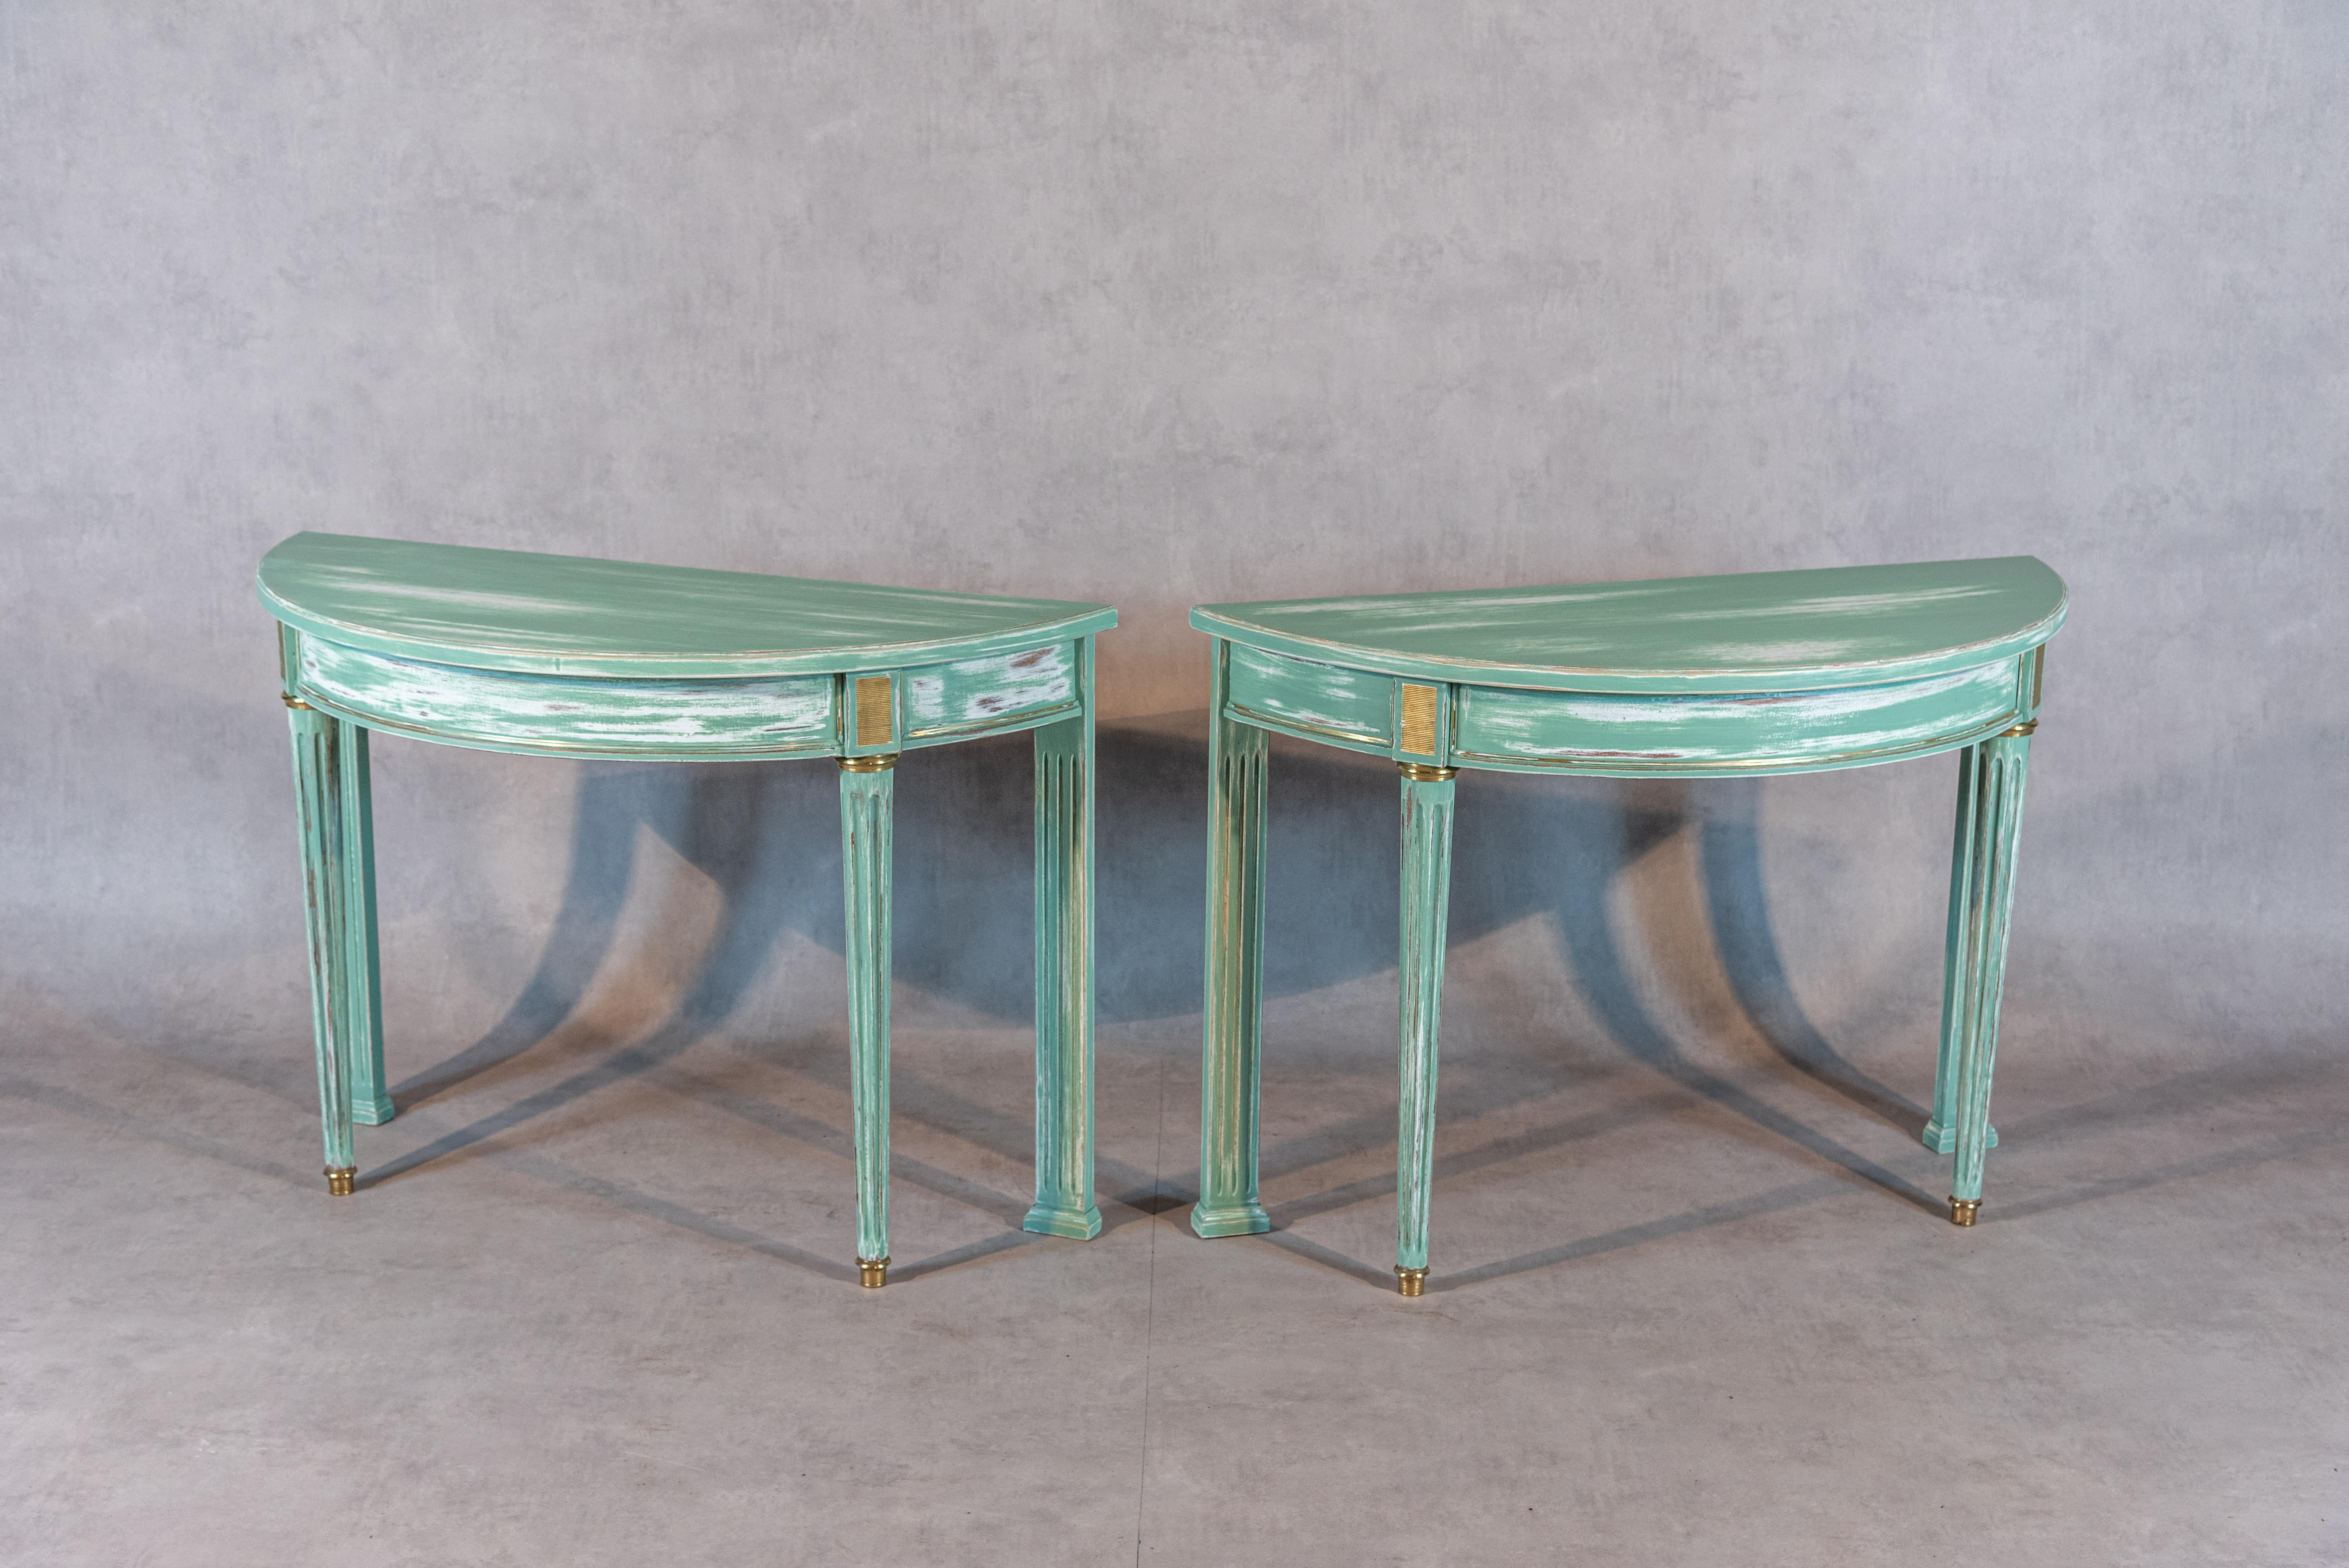 This pair of Louis XVI-style demilune consoles is a stunning and unique addition to any interior space. Created at our atelier in France, these consoles are part of our rethought antique lineup. We took a 20th-century Louis XVI-style round dining